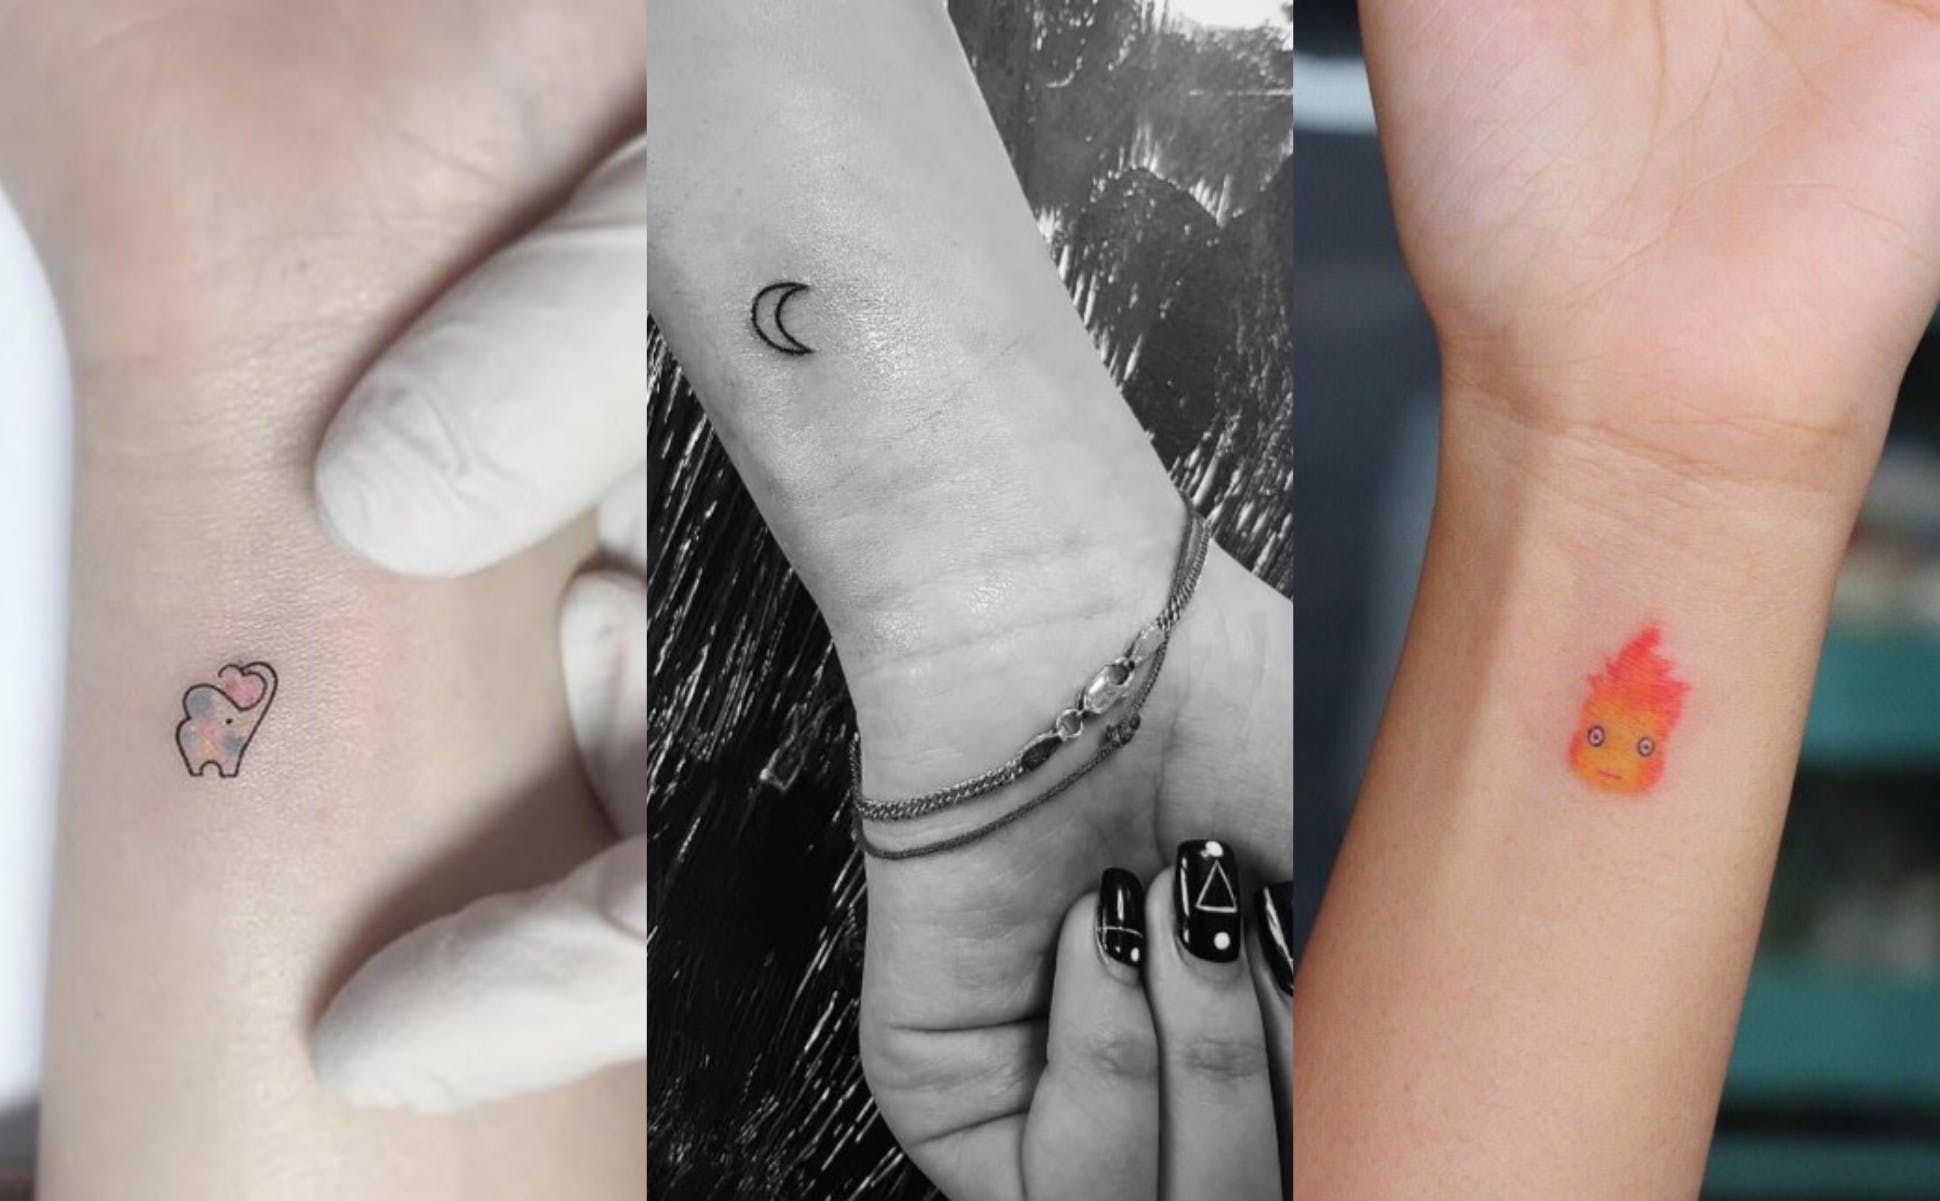 25 tiny, pretty wrist tattoos that'll inspire your next inking